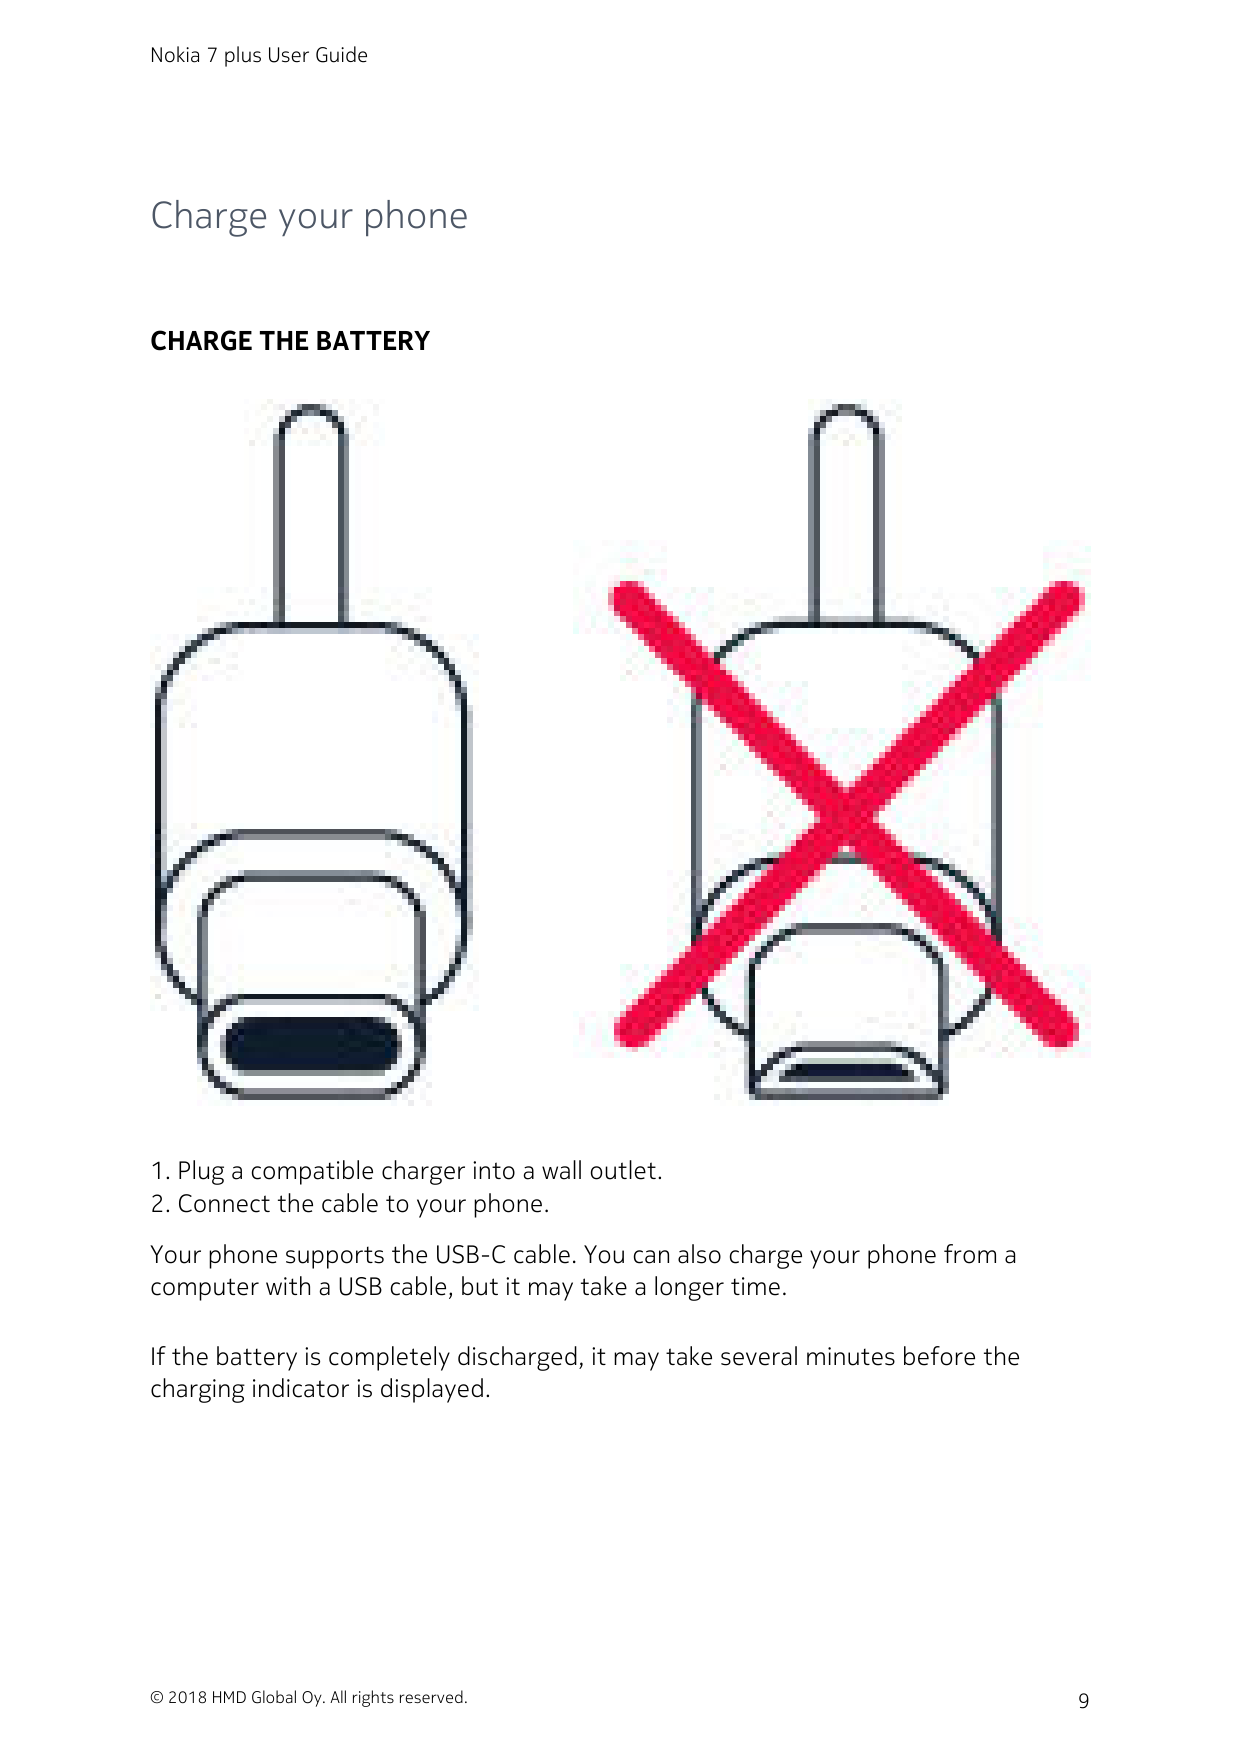 Nokia 7 plus User GuideCharge your phoneCHARGE THE BATTERY1. Plug a compatible charger into a wall outlet.2. Connect the cable t